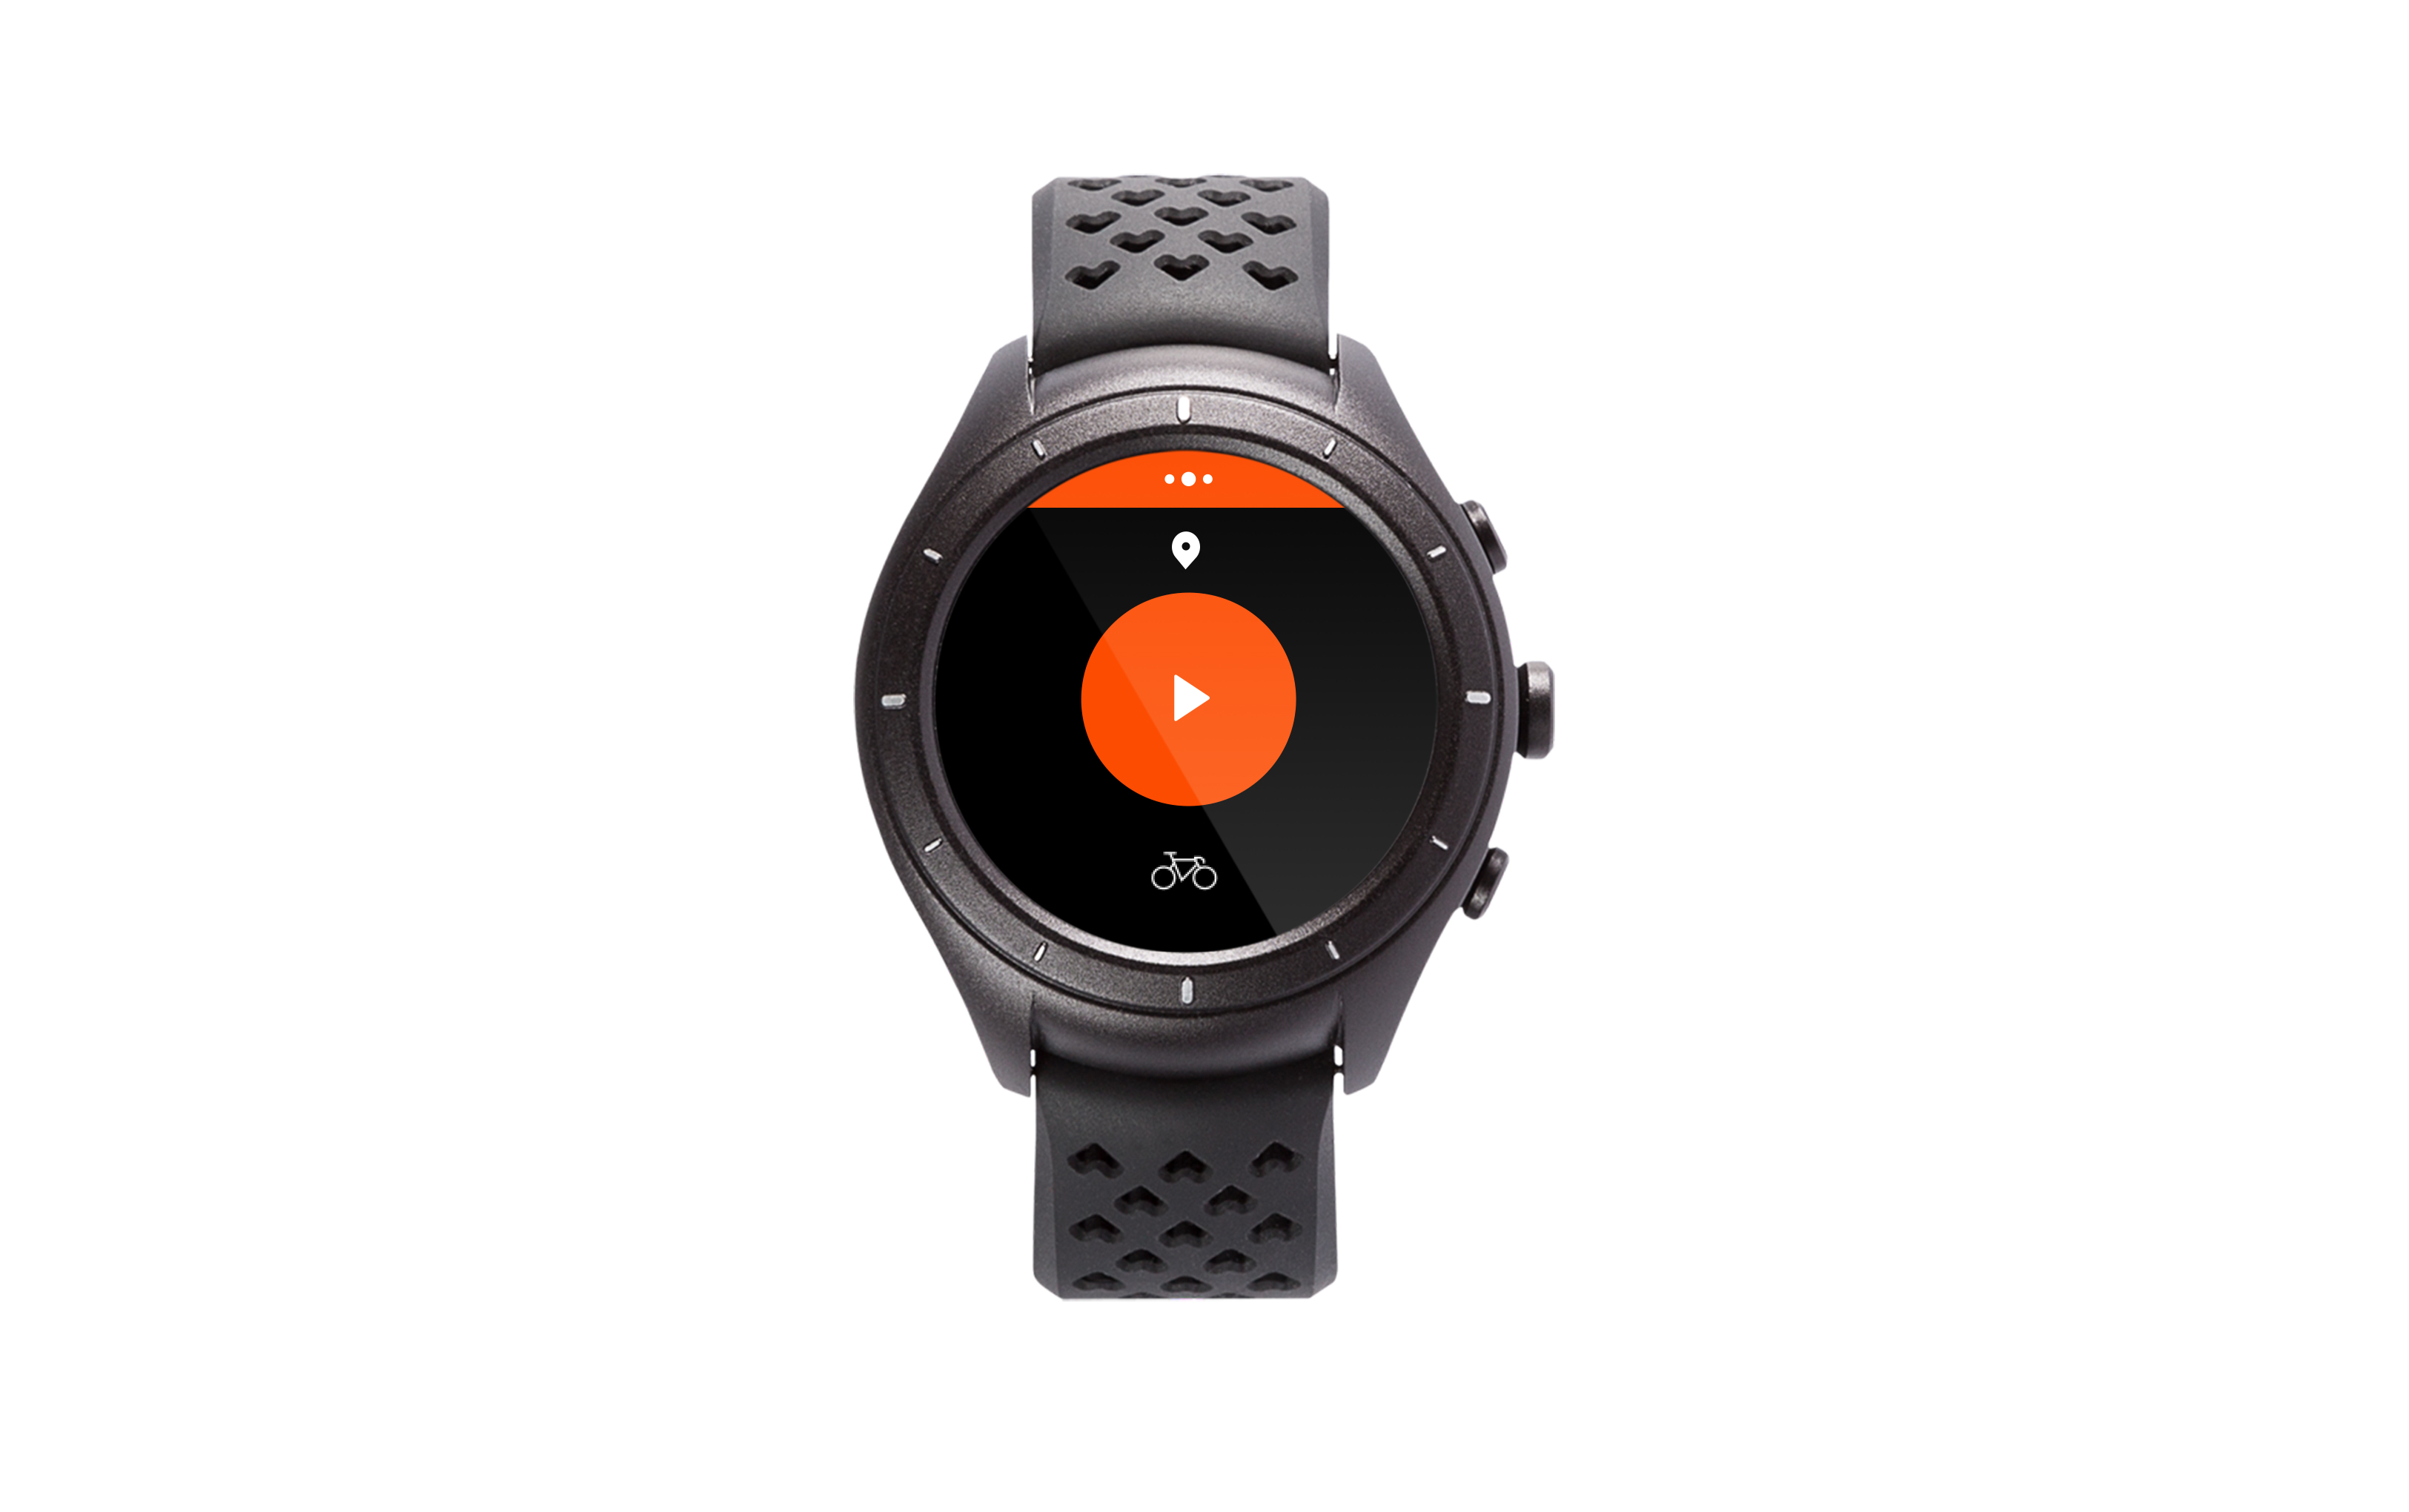 How to set up Strava on a Samsung Galaxy Watch or Gear Sport?